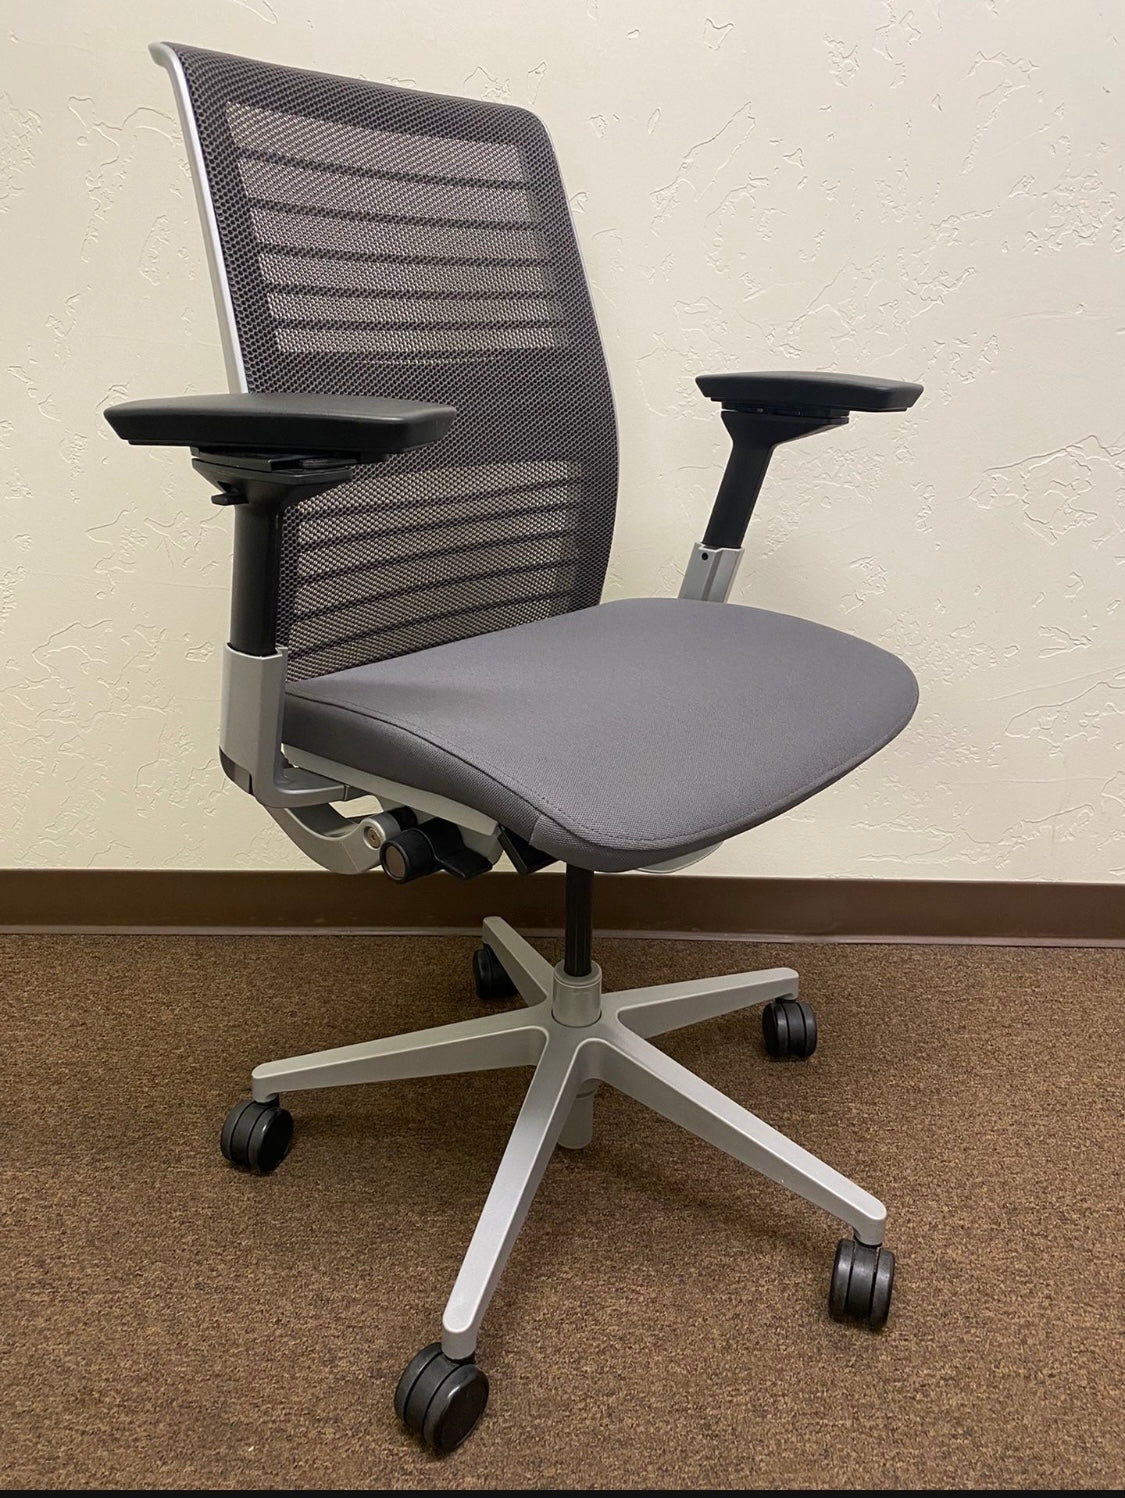 2017-18 model Steelcase Think V2 office chair with 3D Knit Back